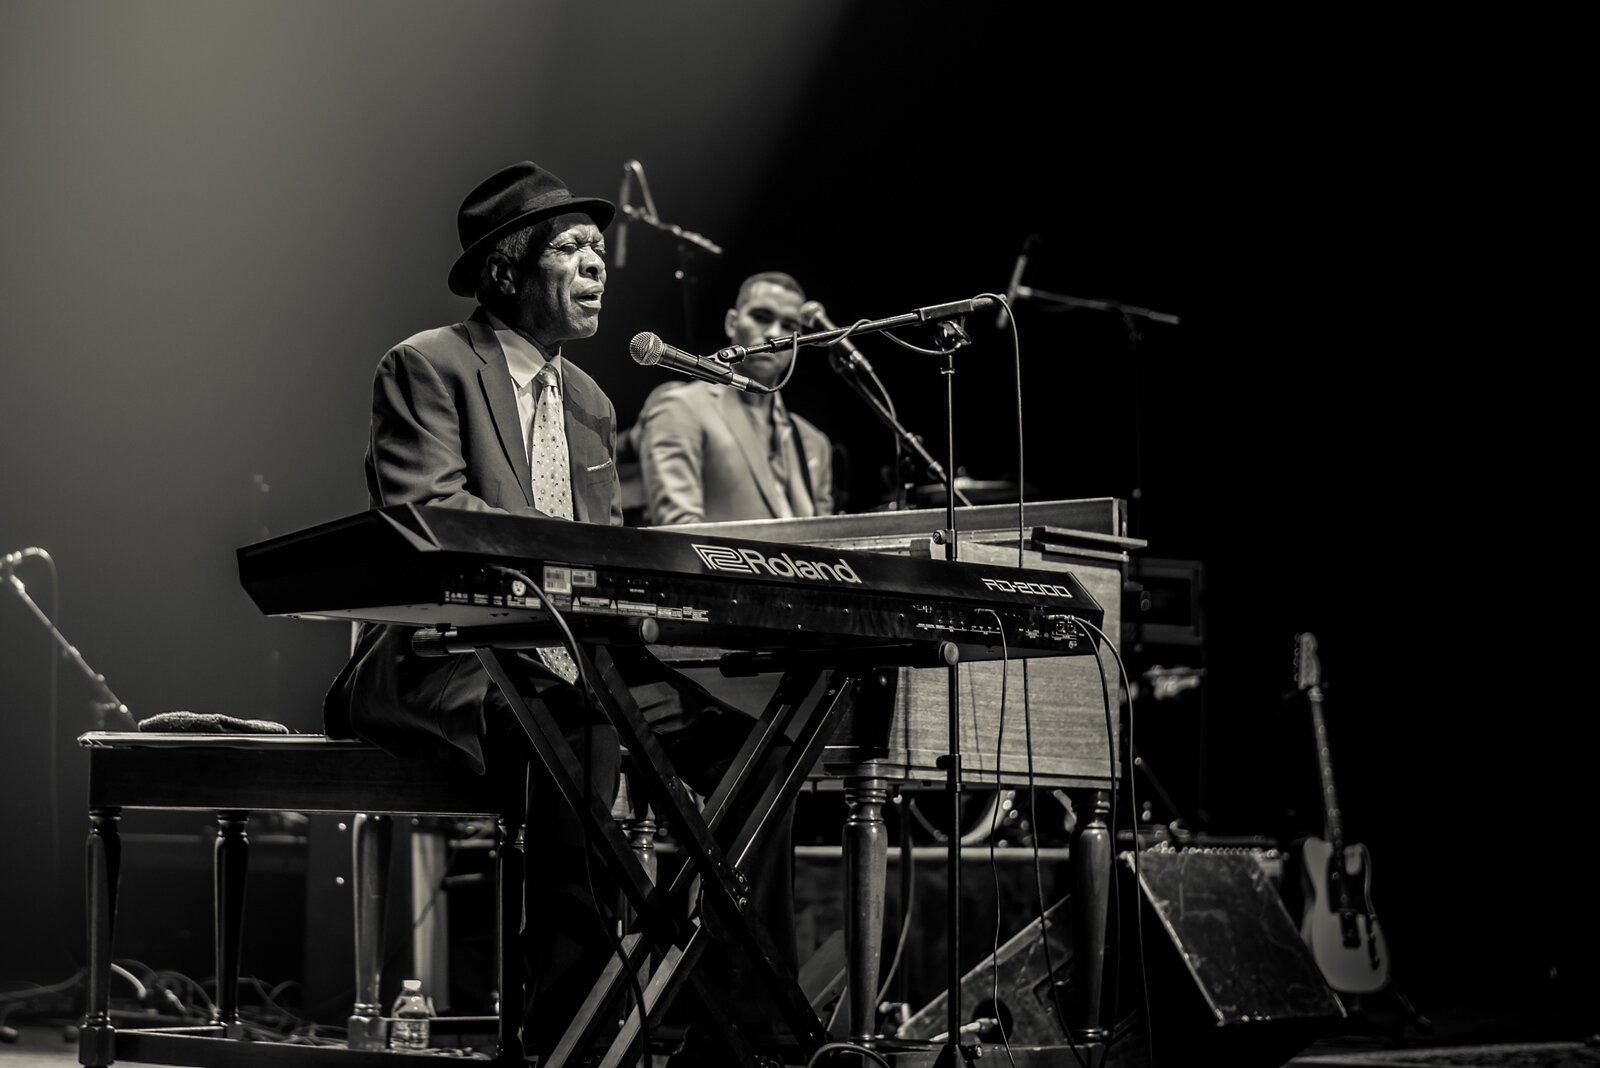 Sneak Peak: Booker T. Jones performed at the Kalamazoo State Theater in July as part of the Black Arts & Culture Festival and in celebration of the Kalamazoo Public Library's 150th anniversary. 